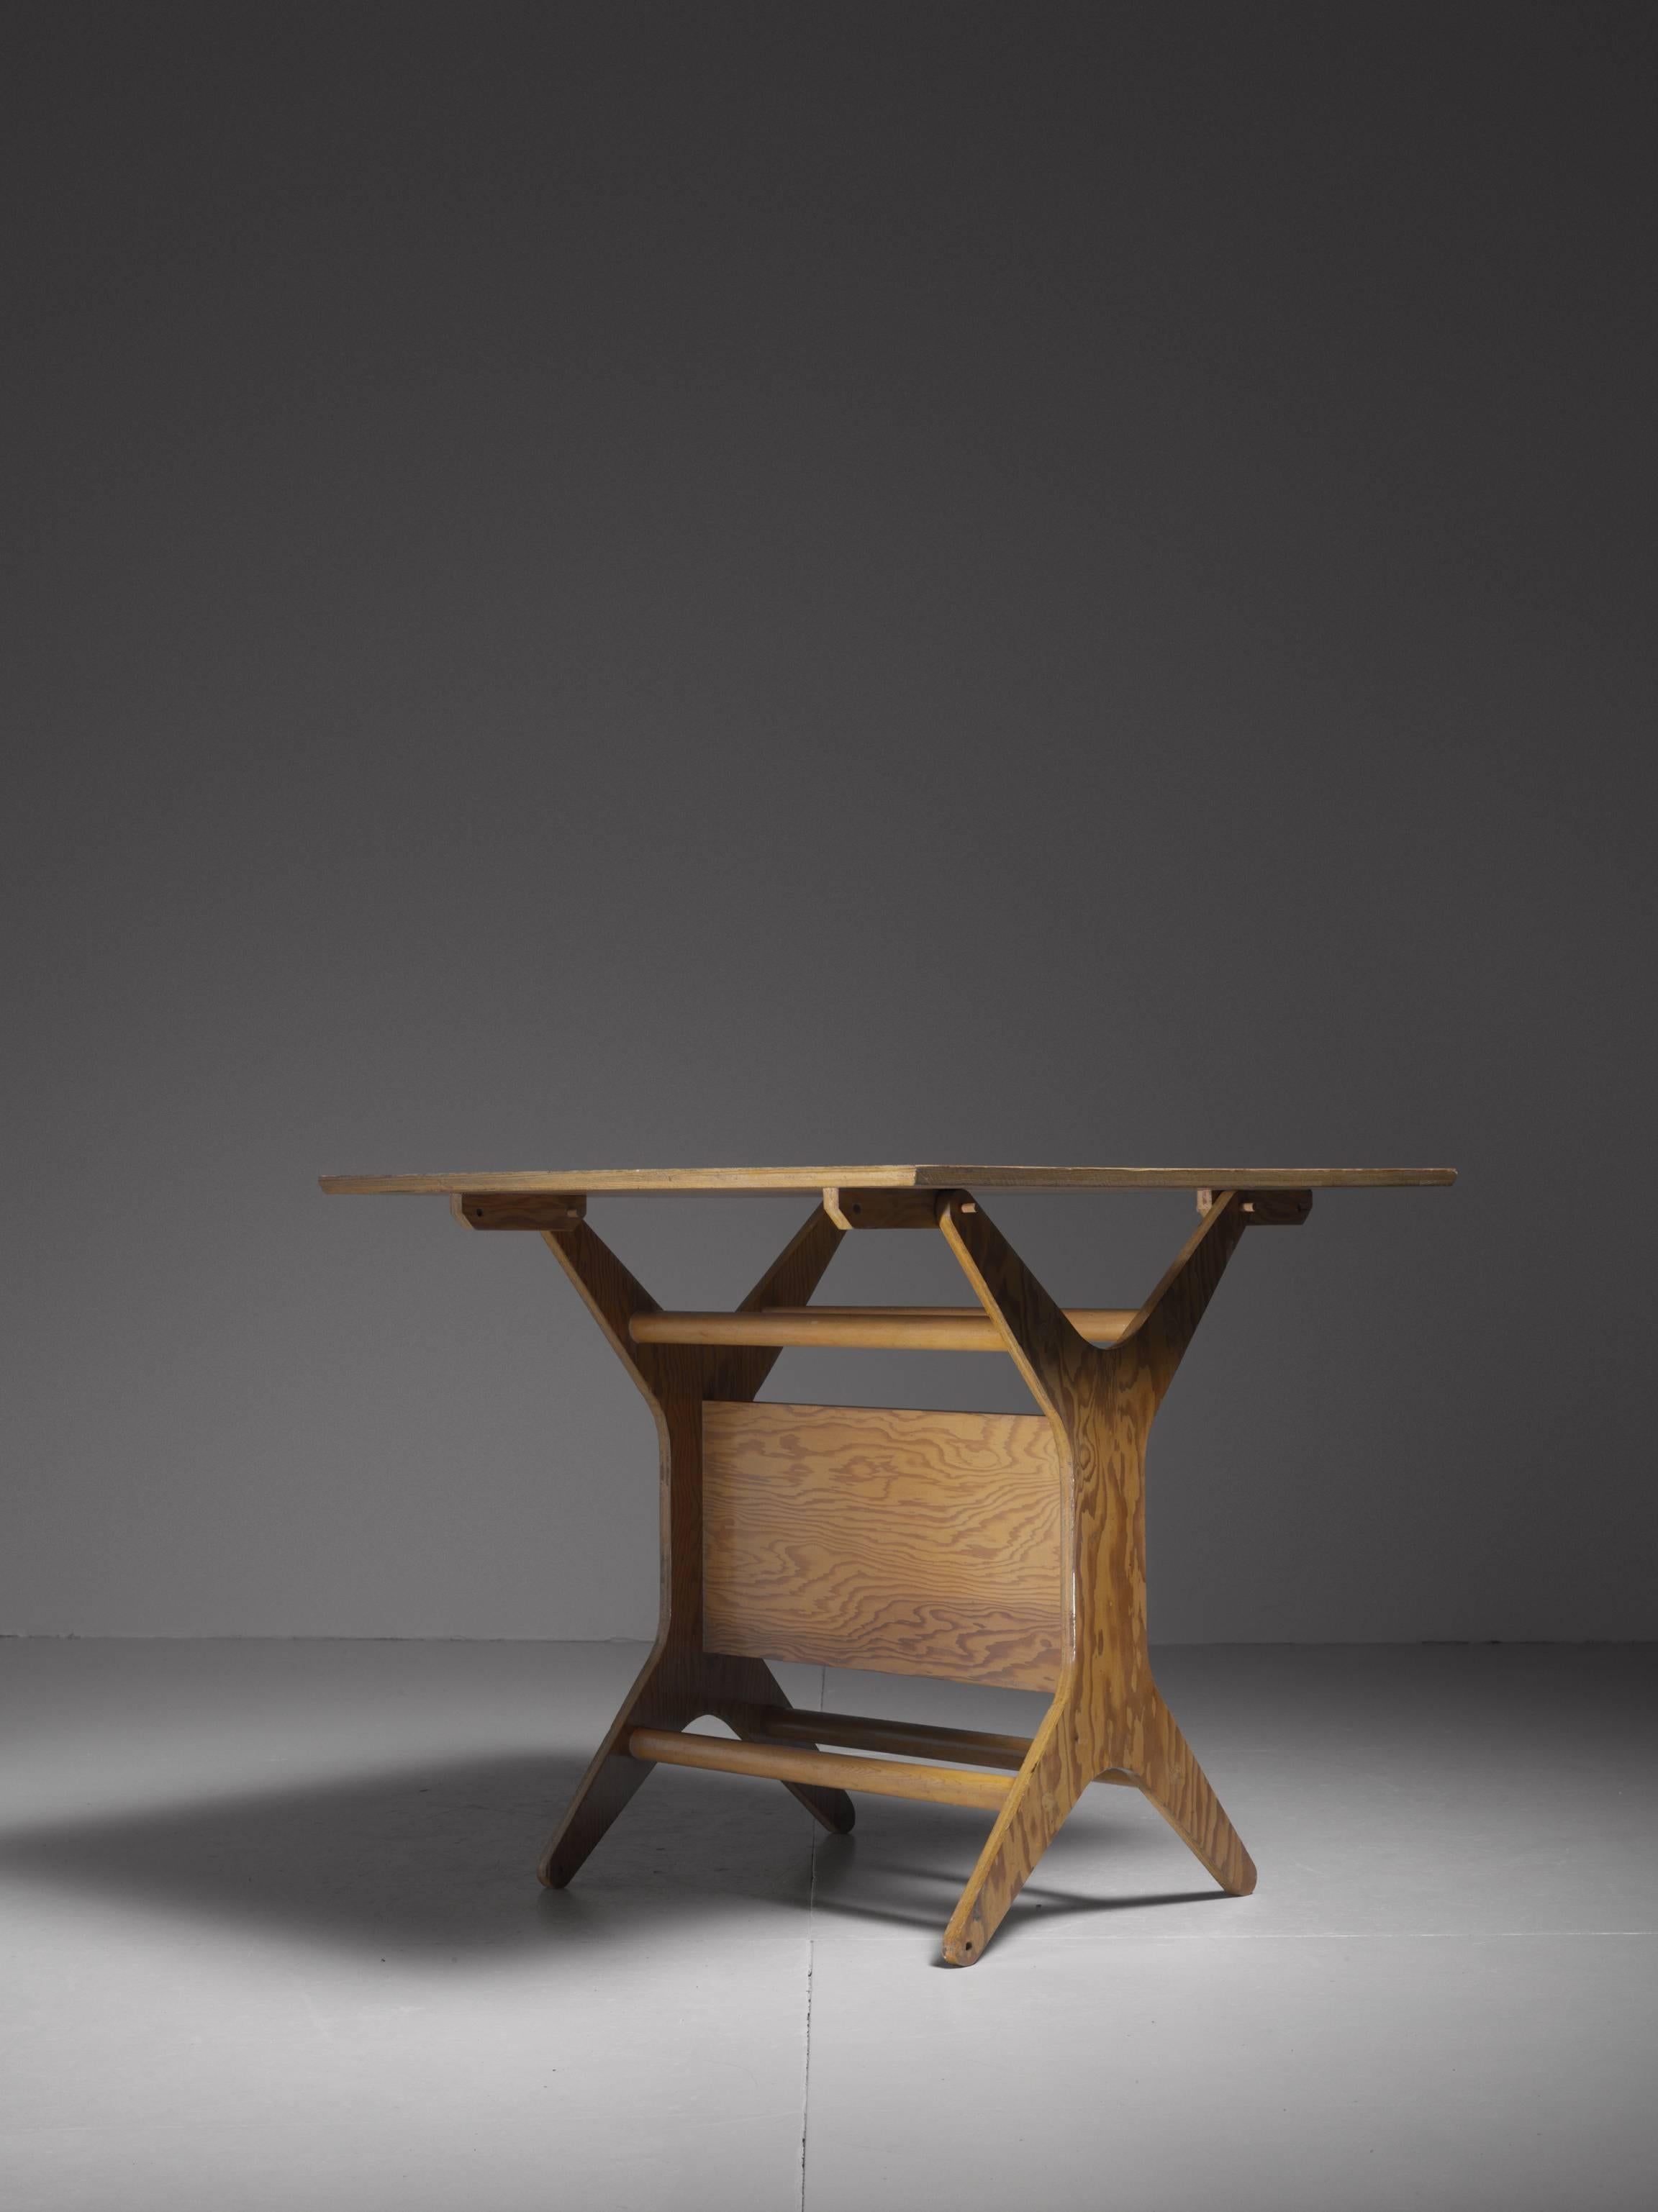 A rare Klaus Grabe table, made of an X-shaped pitch pine plywood base and a square top. By placing the base in a horizontal or vertical position, you can choose between a low (50.5 cm/20